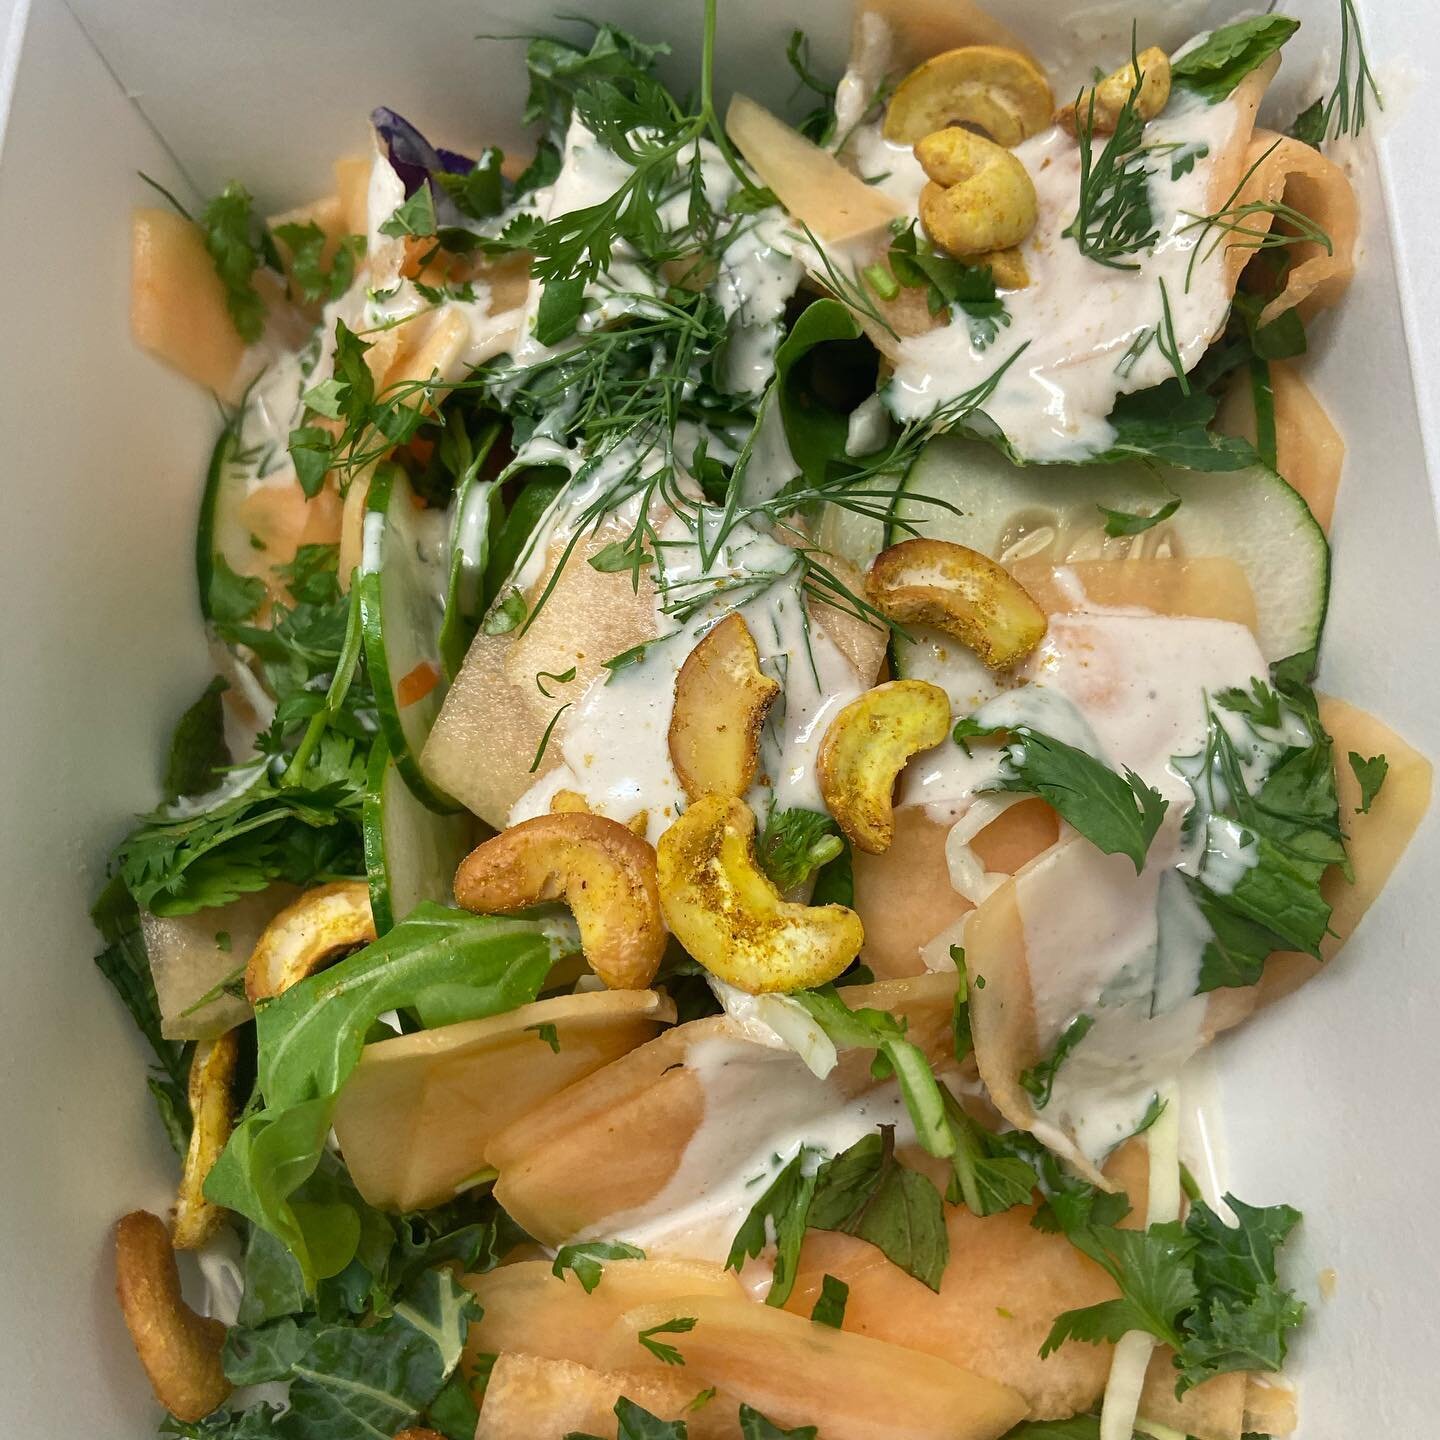 Cantaloupe salad with curry cashew, cooling cucumber, and loads fresh herbs